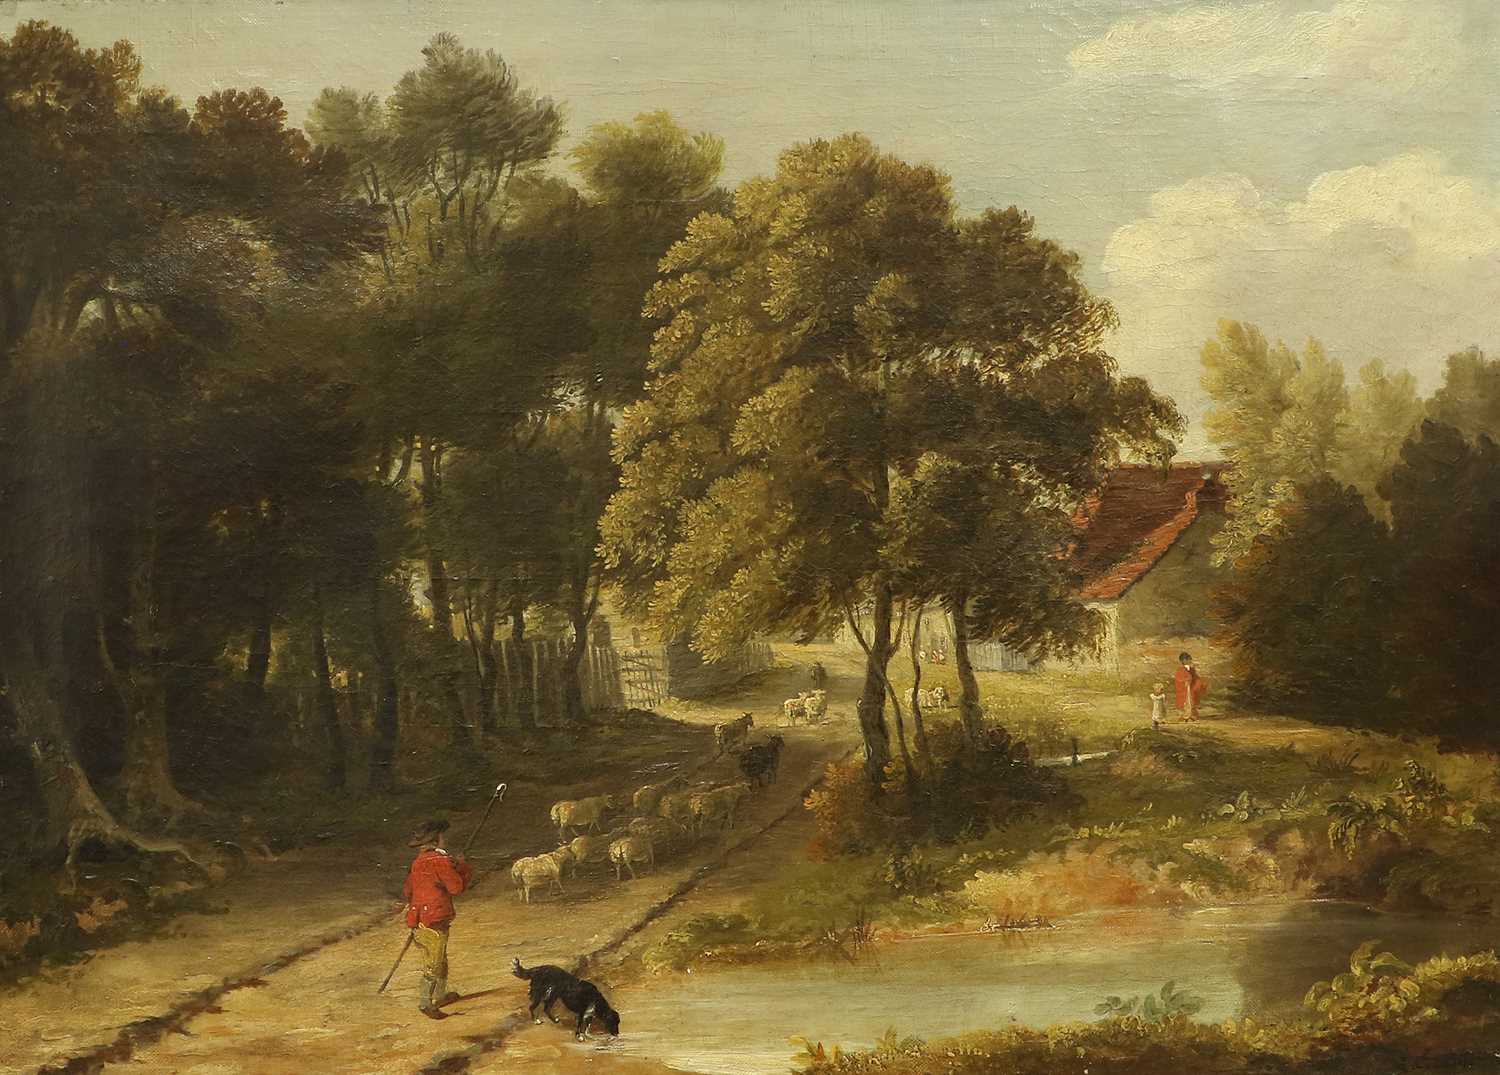 British School (Early 19th Century) A shepherd and his flock on a wooded country pathway